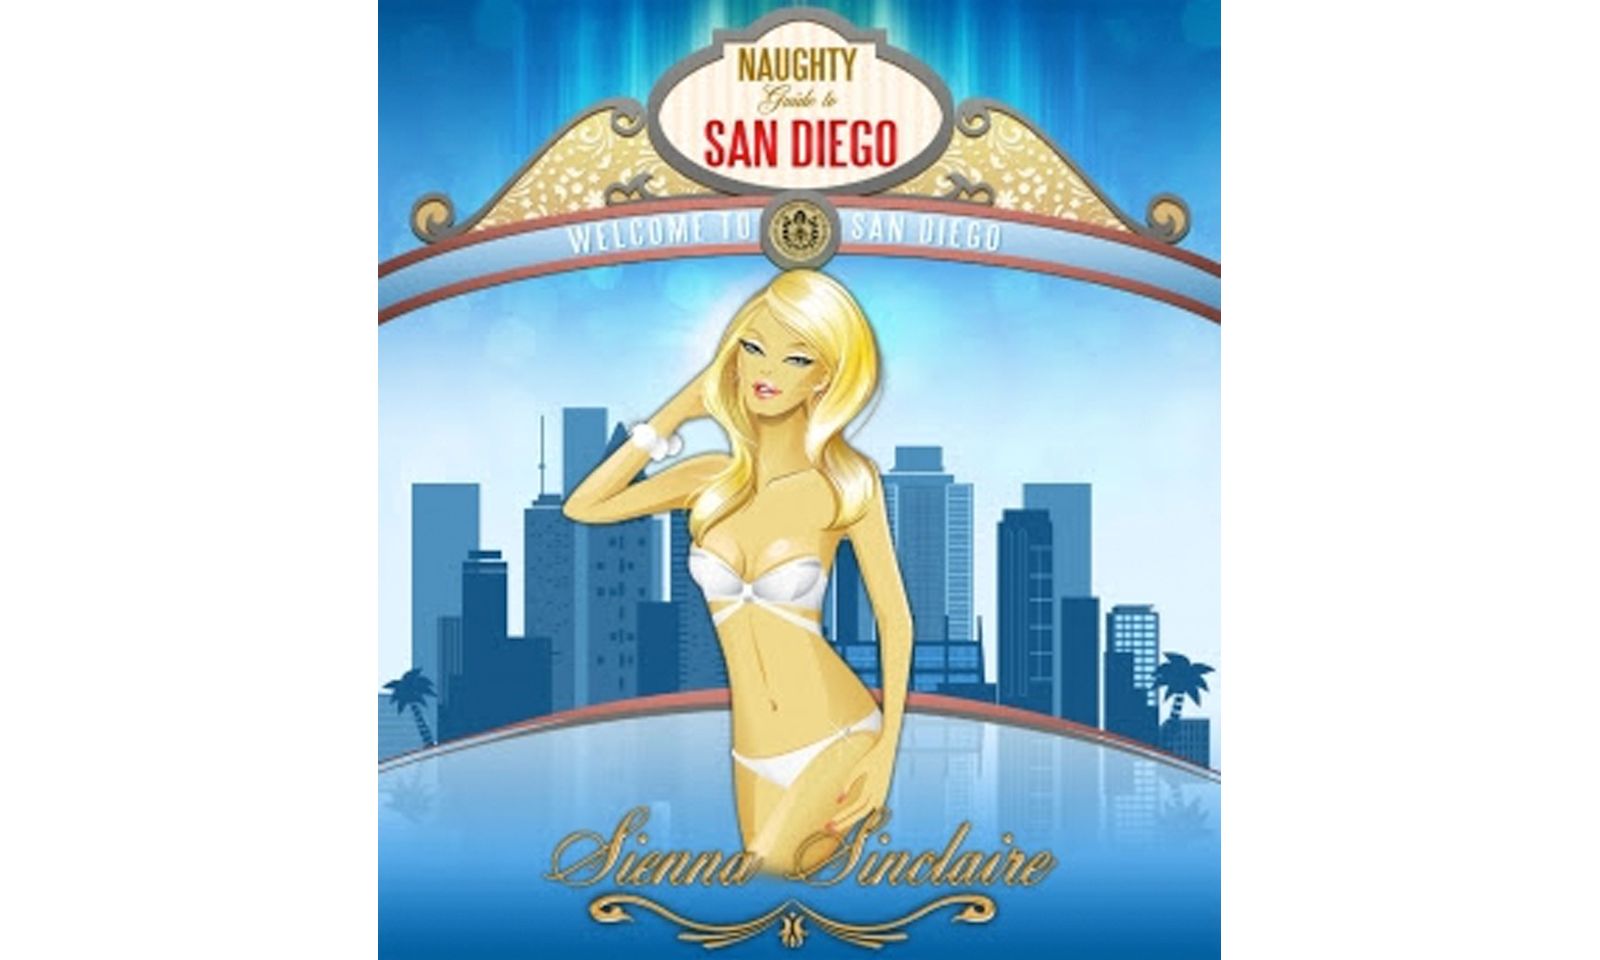 Sienna Sinclaire’s ‘Naughty San Diego’ Book Launch This Weekend